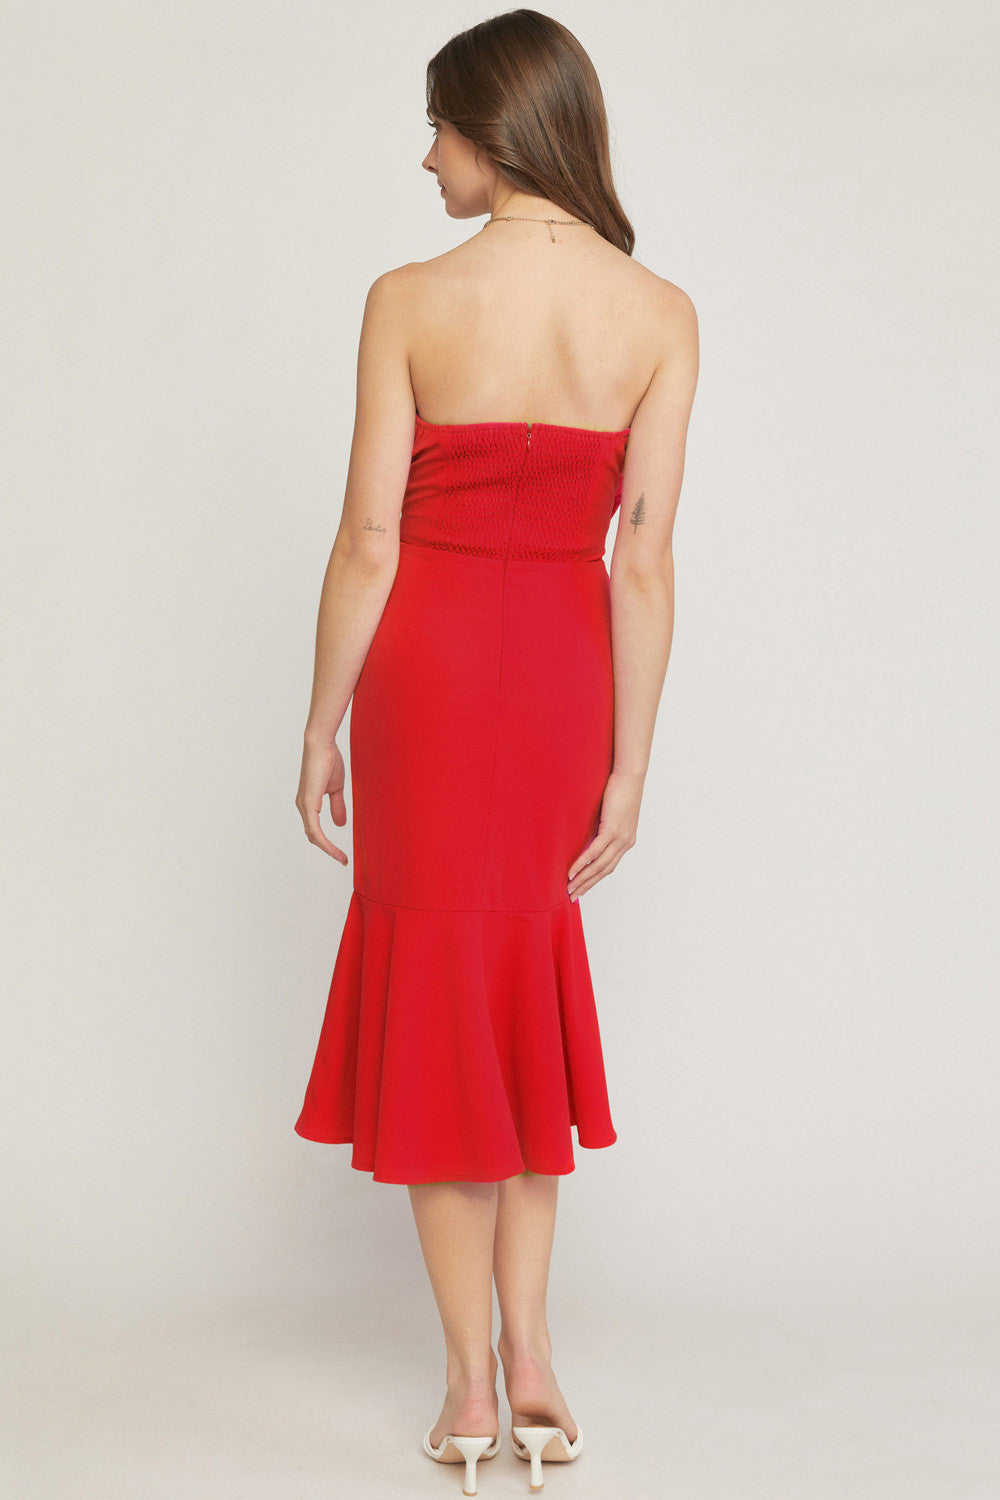 It All Begins With Love Pleated Strapless Dress